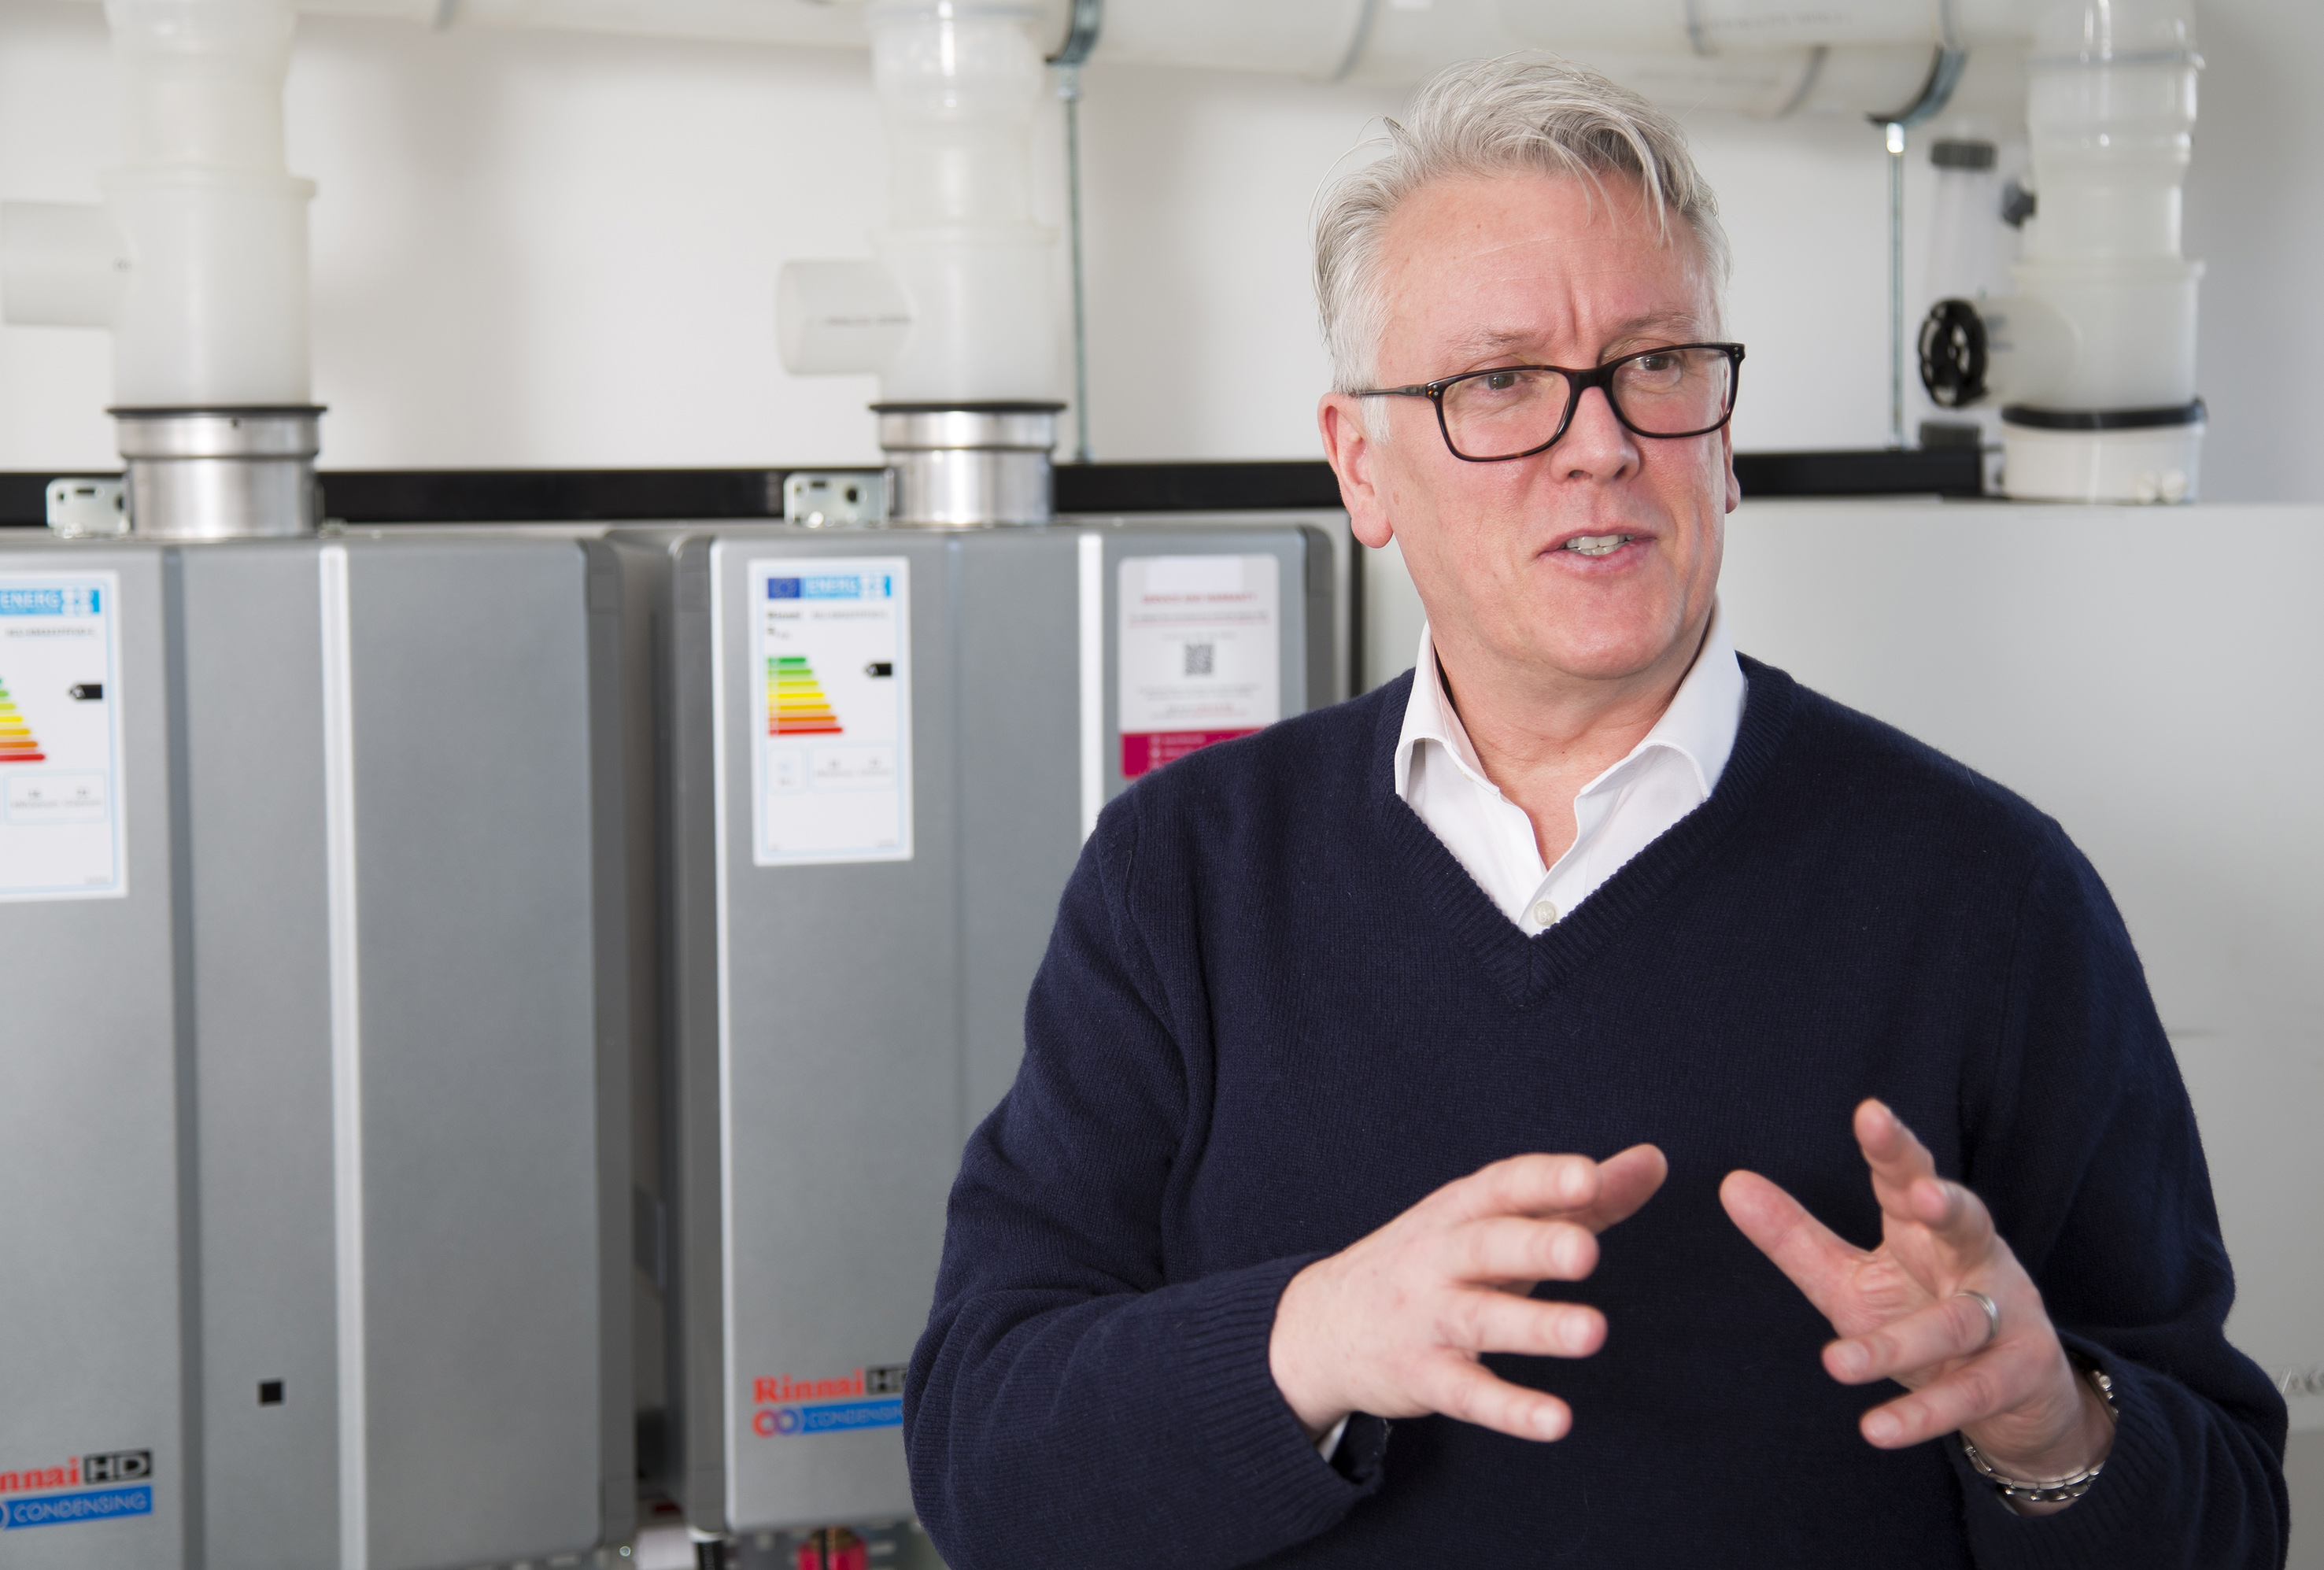 RINNAI AIMS FOR DOUBLE GROWTH IN LESS THAN 10 YEARS @rinnai_uk